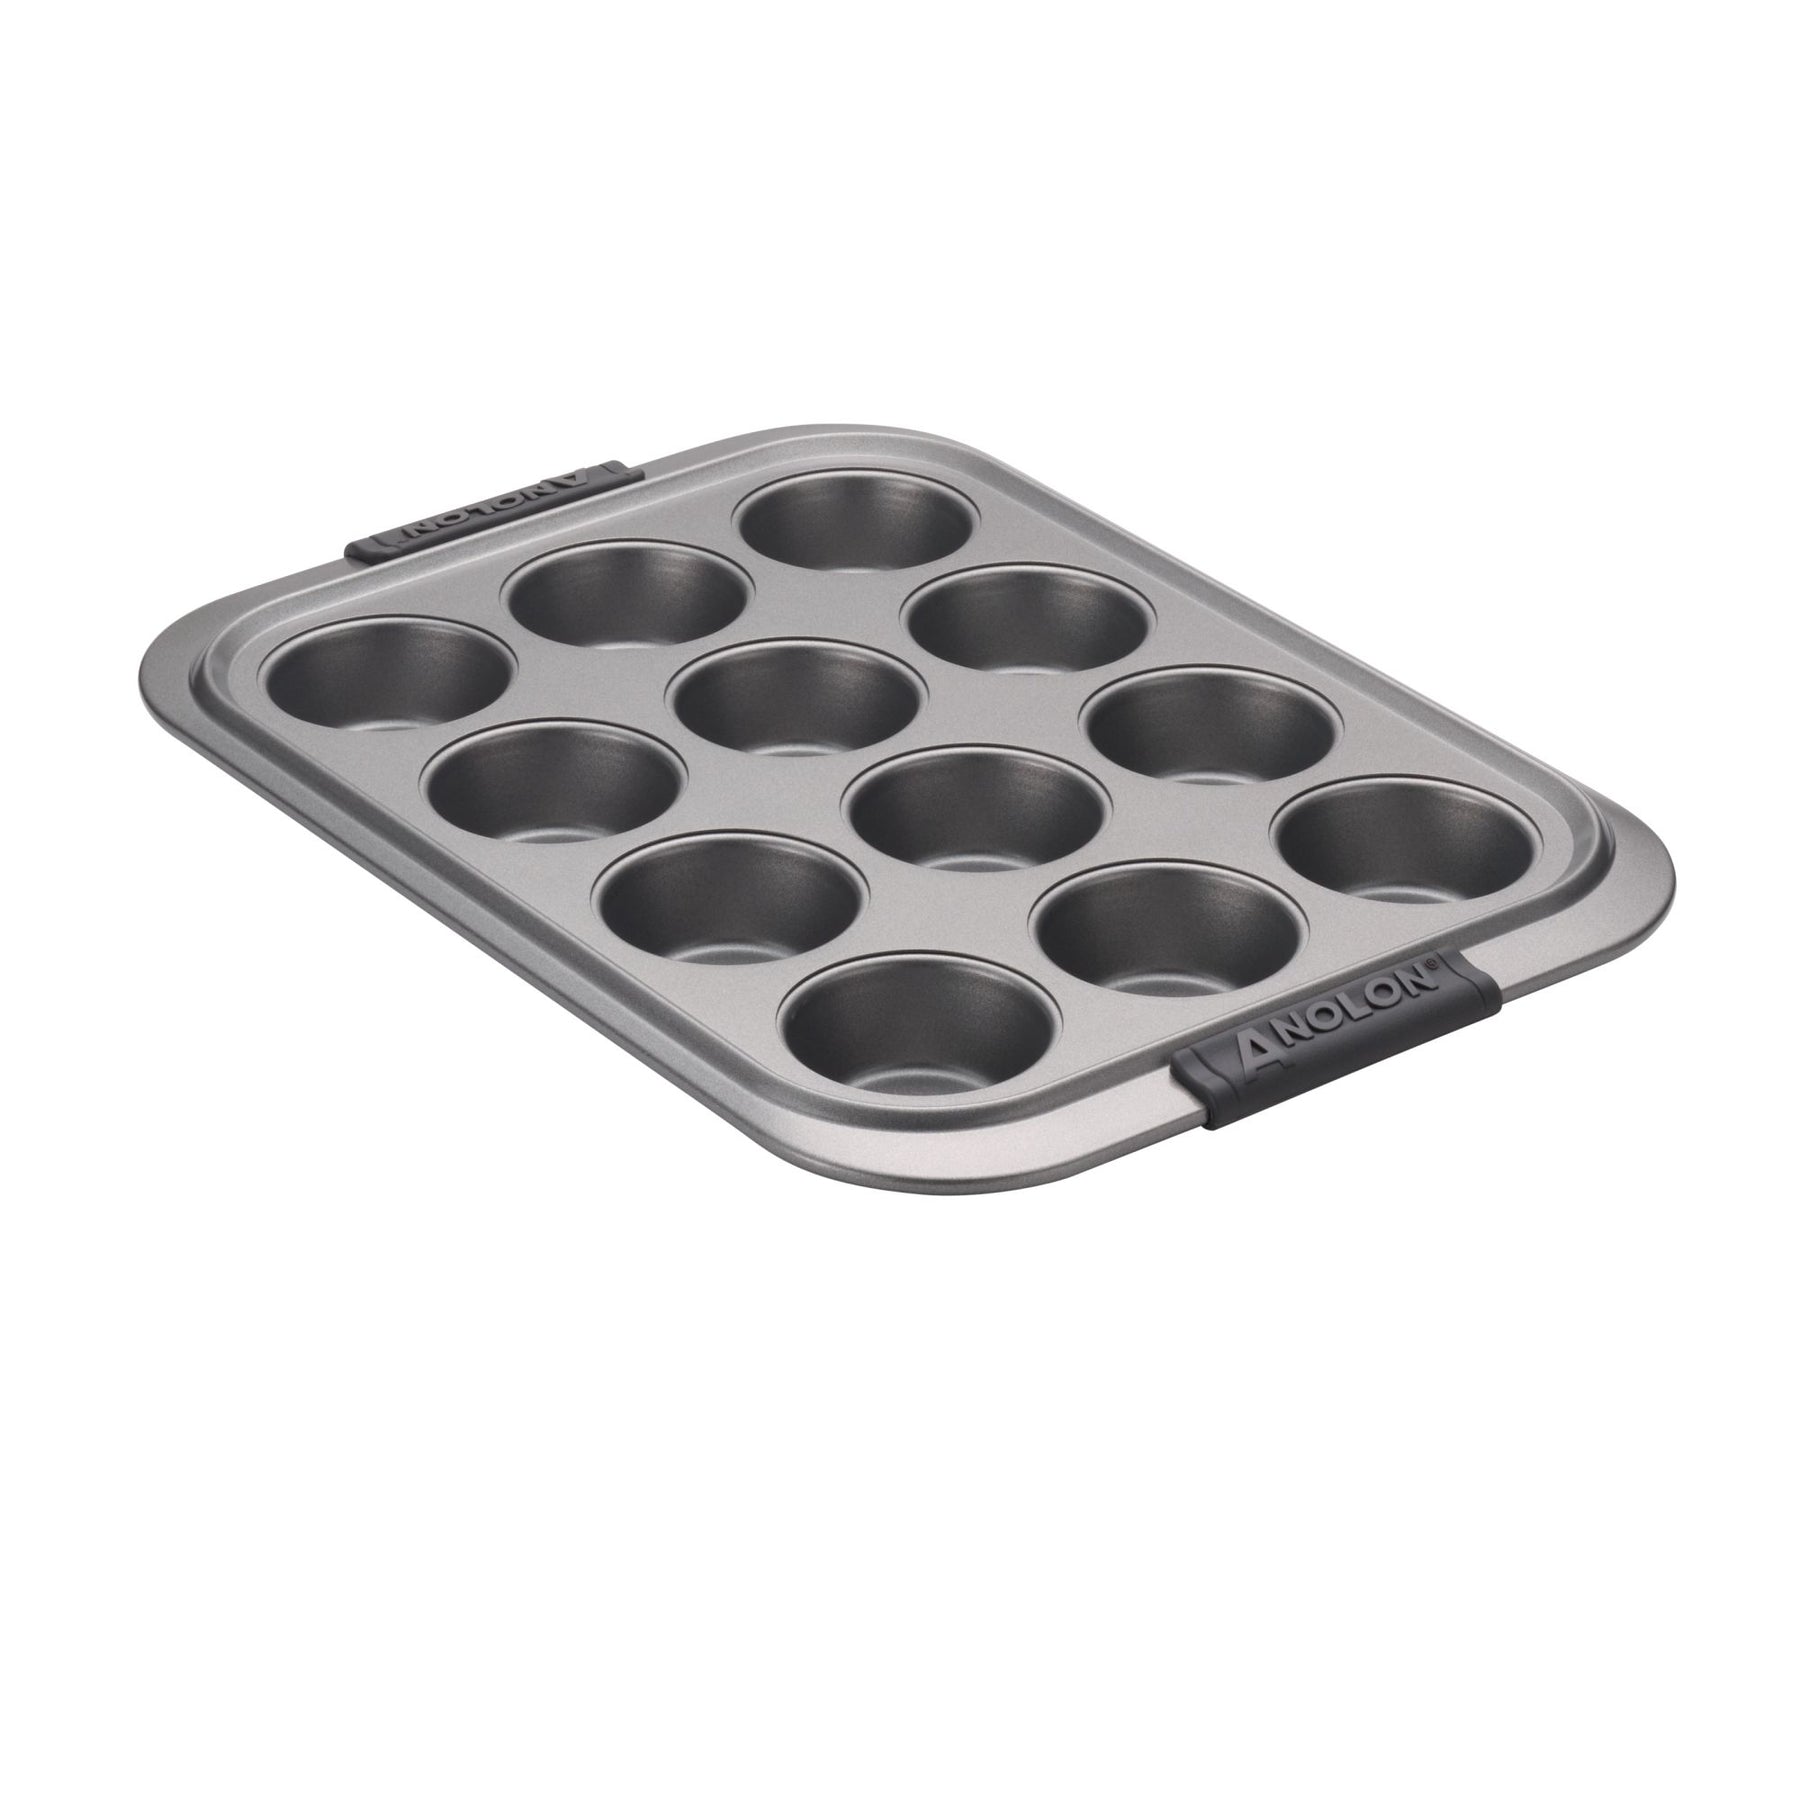 Stainless Steel Muffin Pan